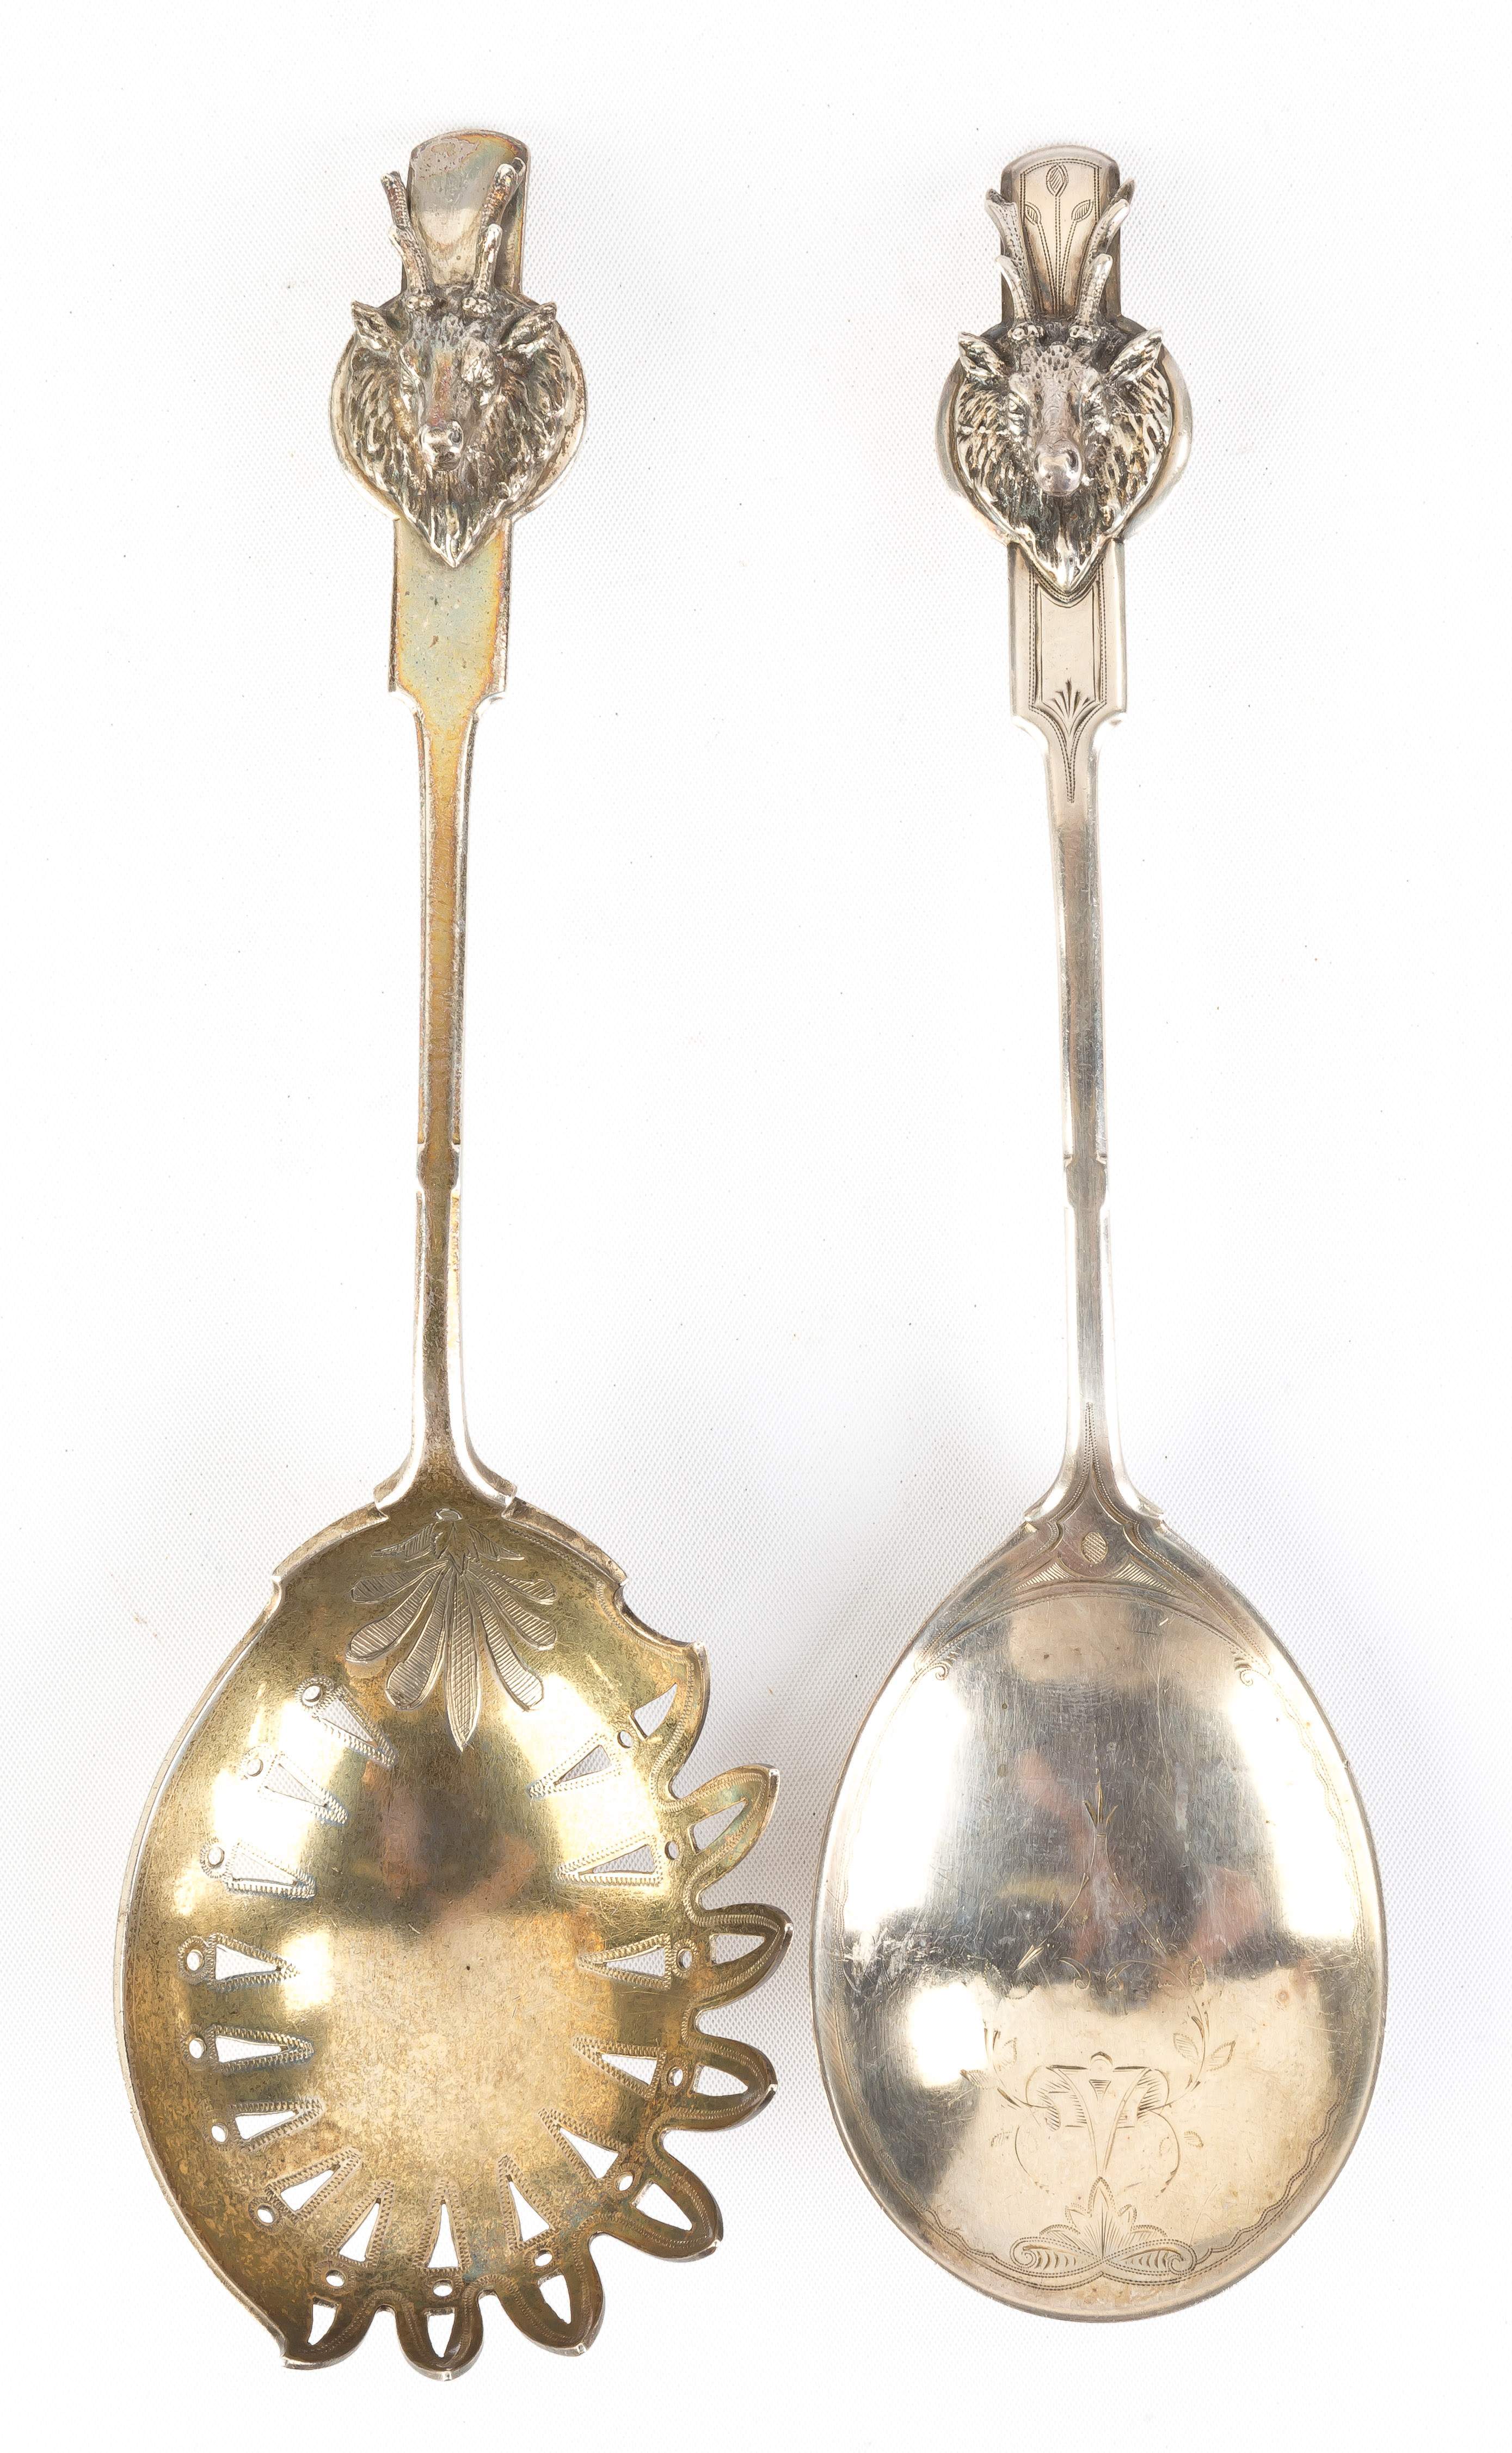 Potent Two Sterling silver serving pieces: a Horseradish 